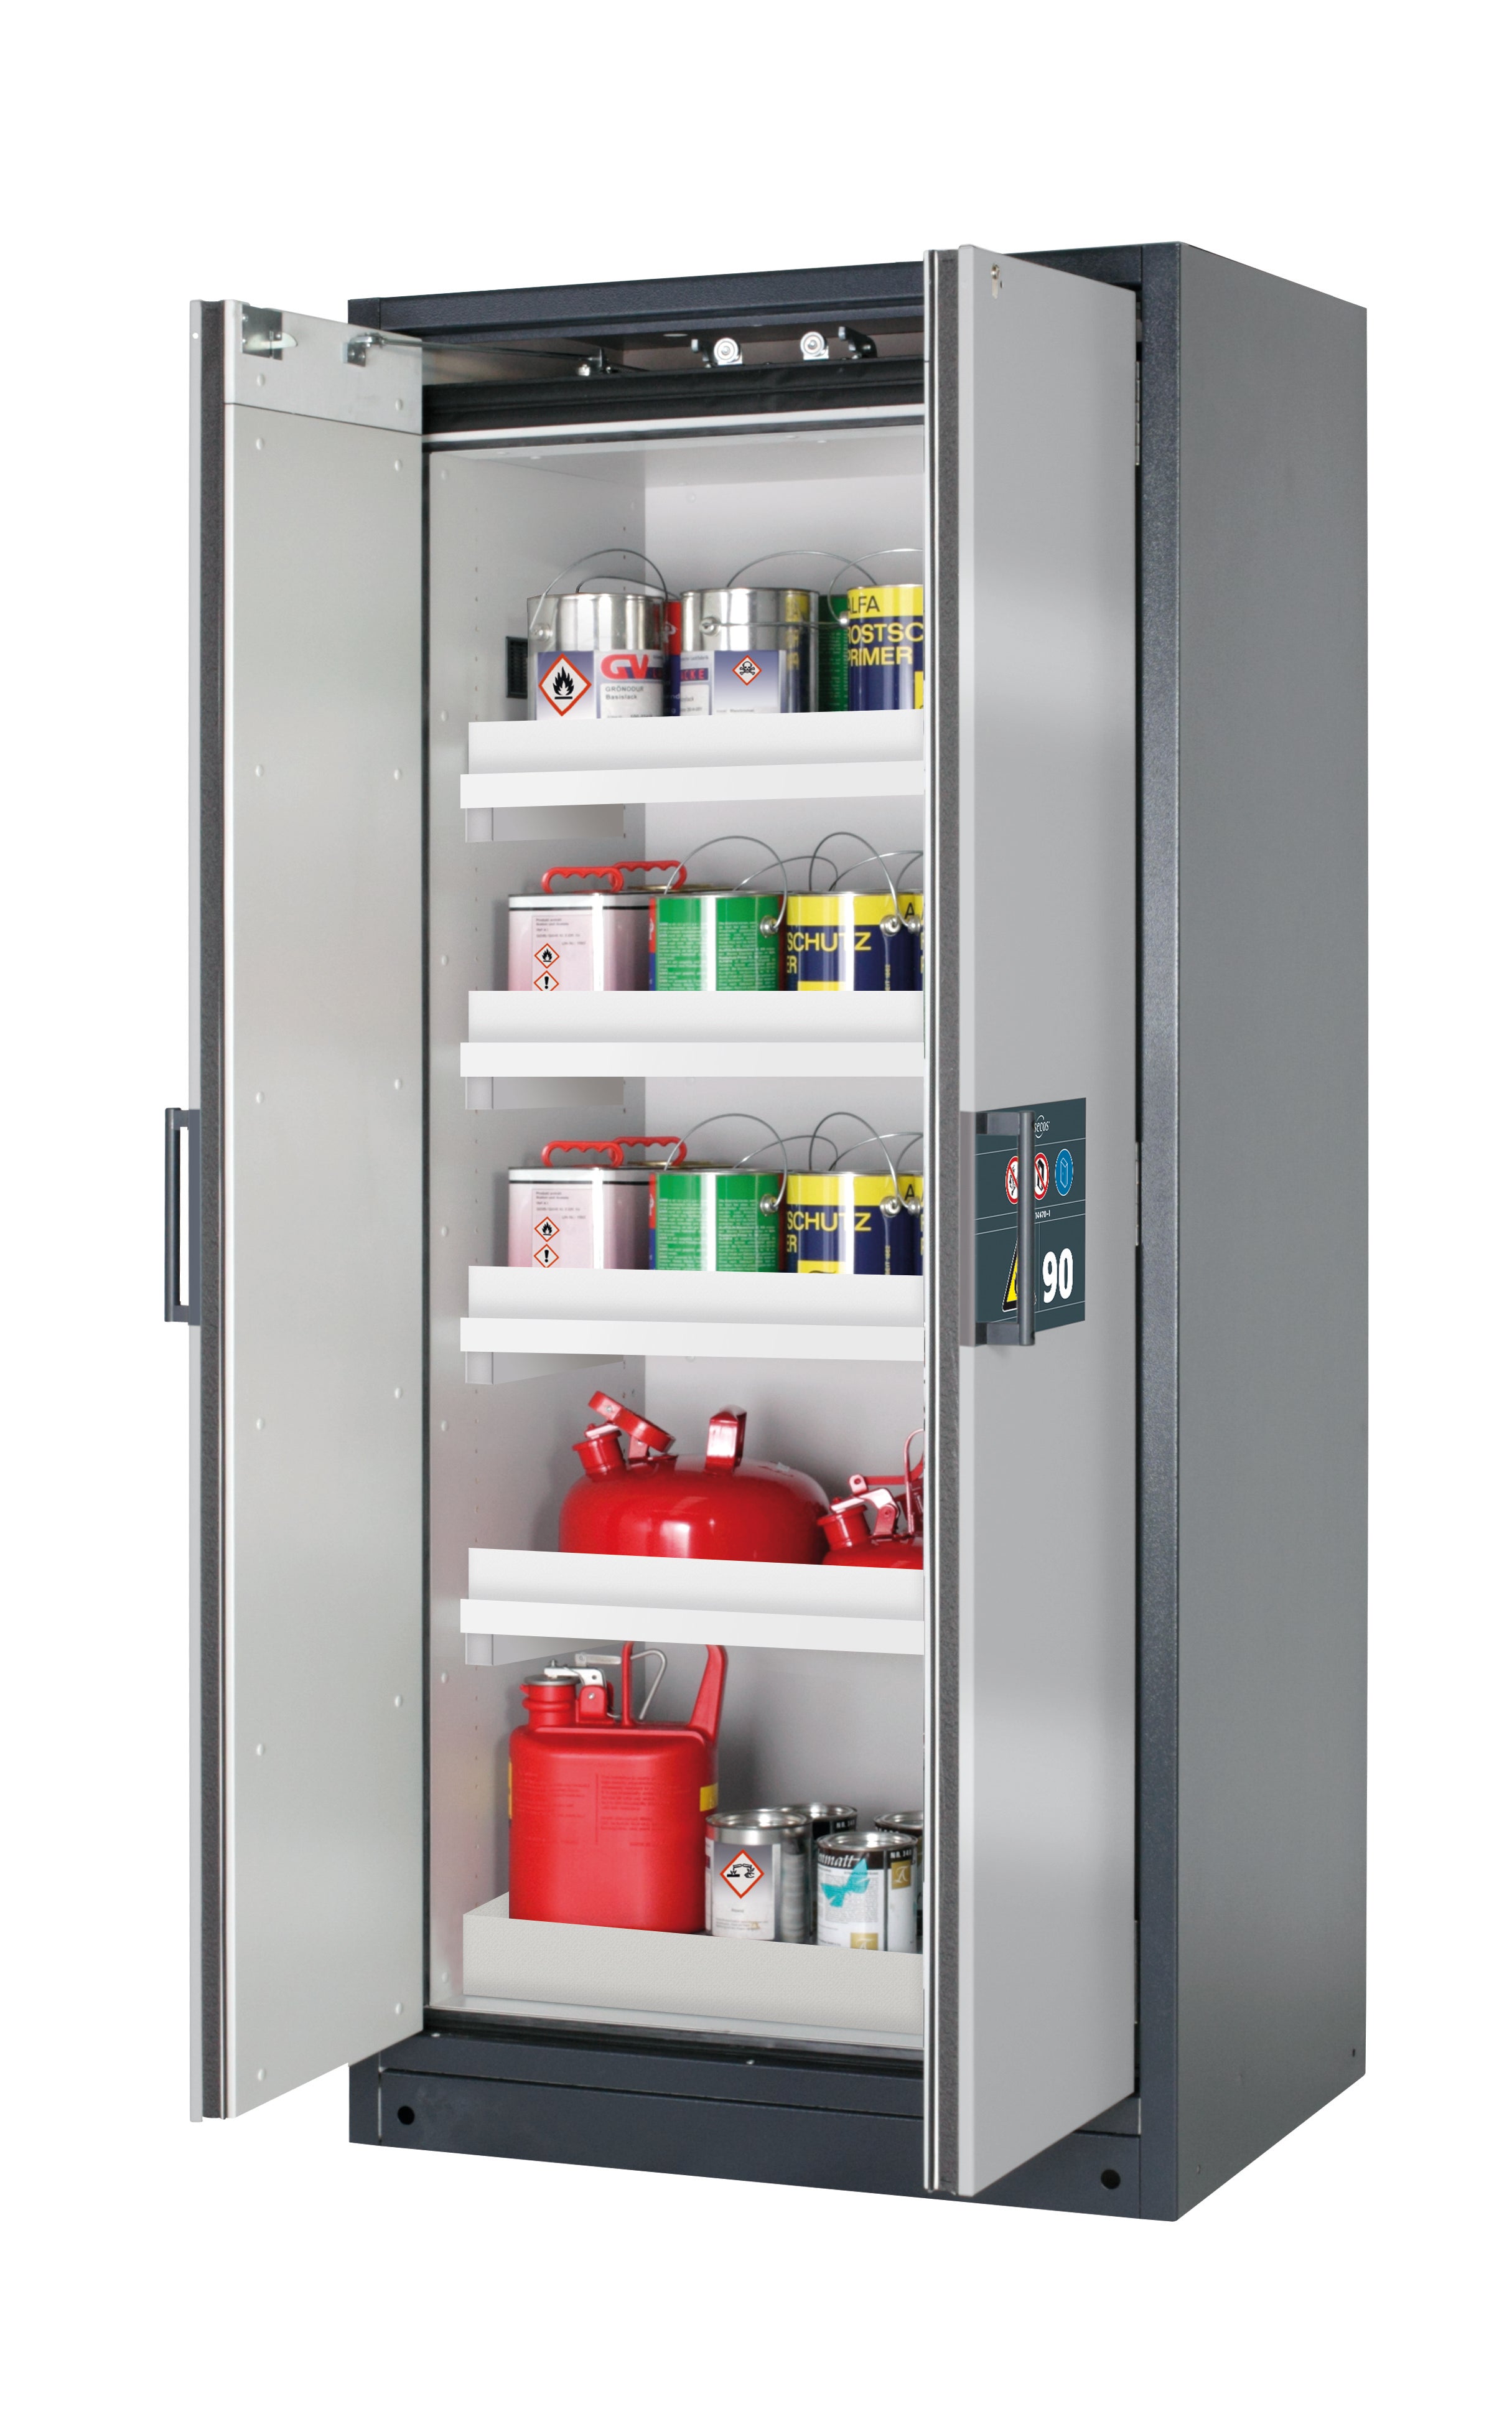 Type 90 safety storage cabinet Q-CLASSIC-90 model Q90.195.090 in asecos silver with 4x tray shelf (standard) (polypropylene),